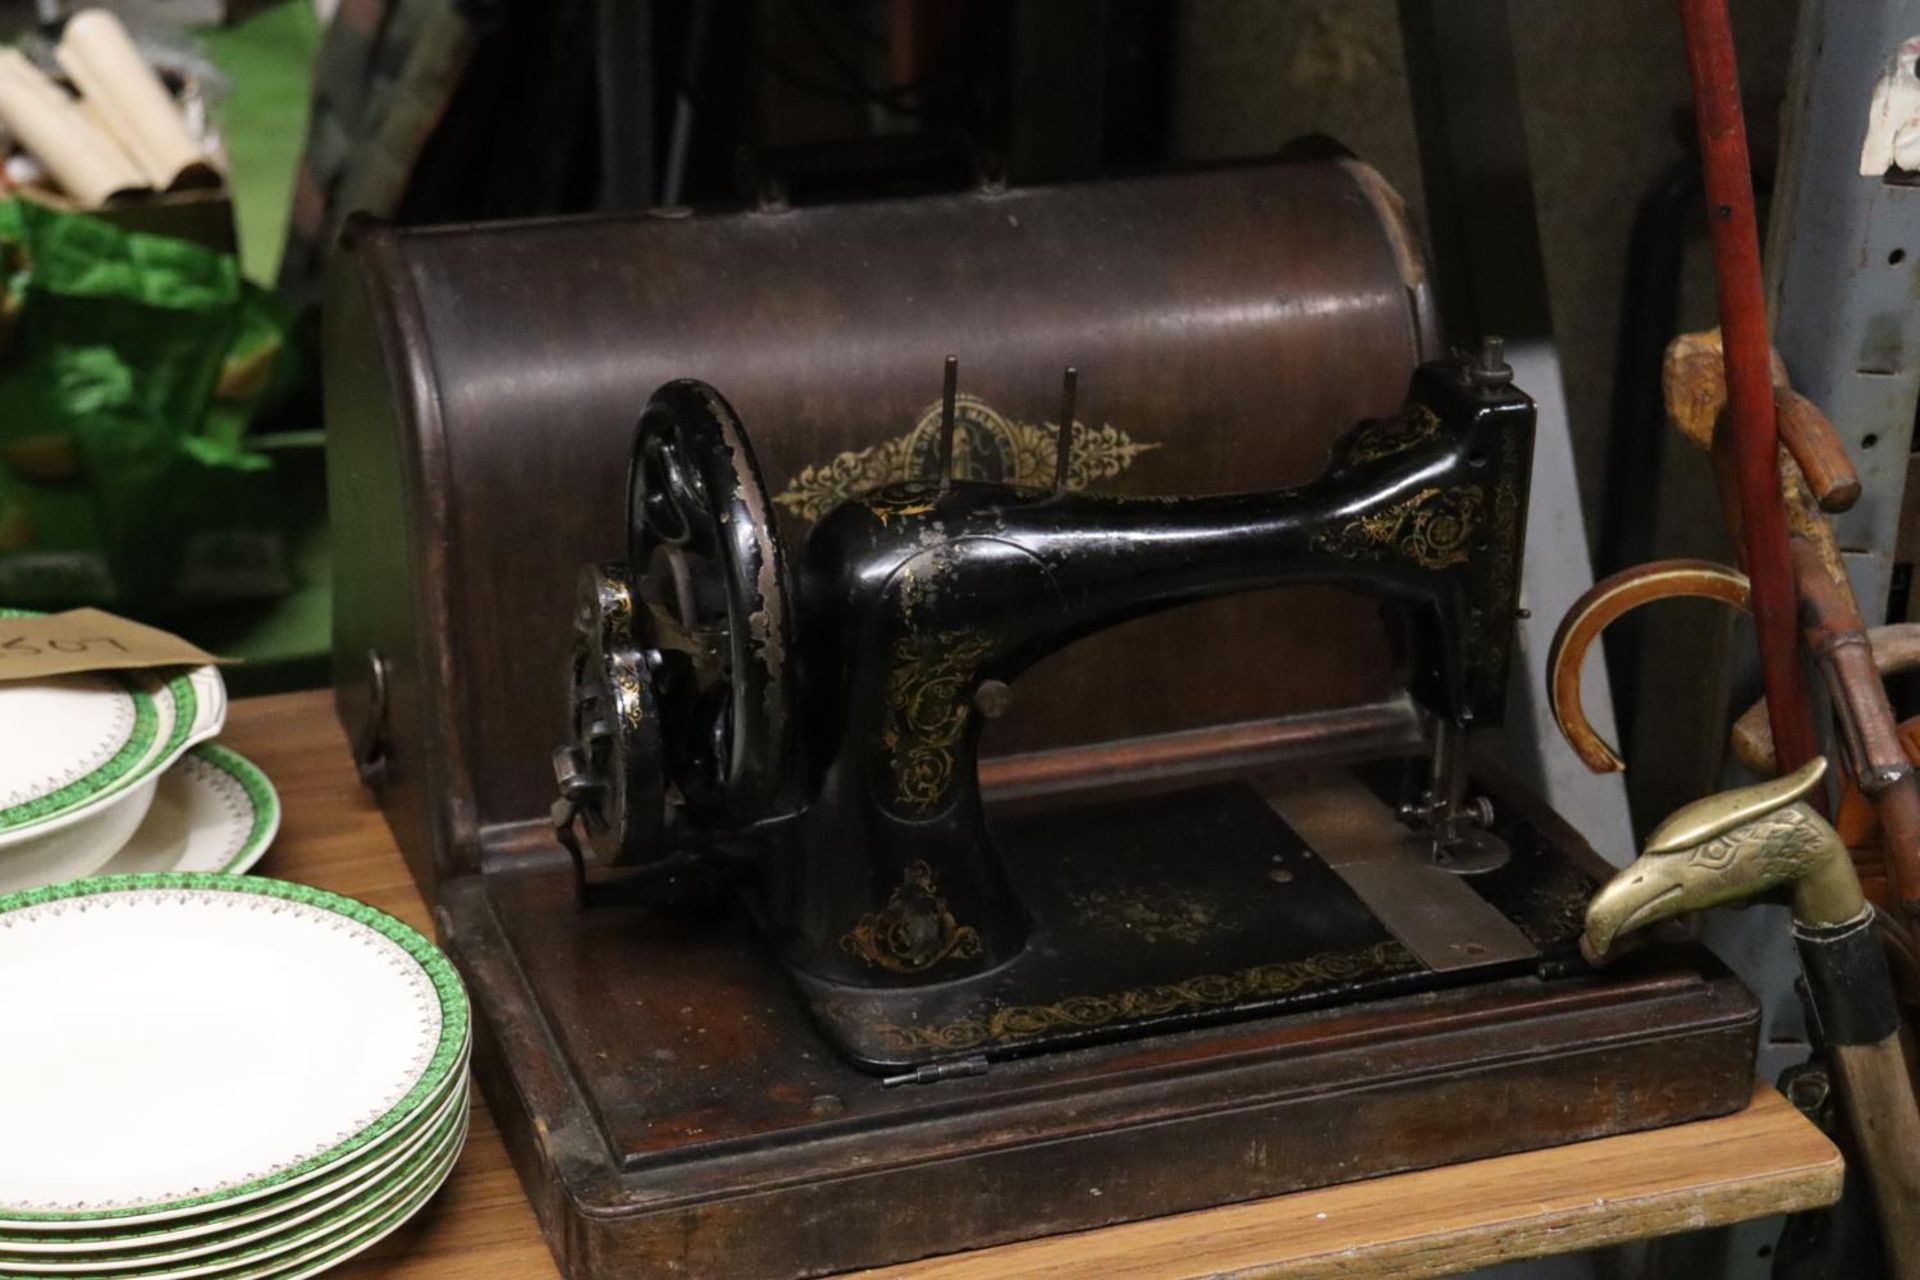 A VINTAGE SINGER SEWING MACHINE IN THE ORIGINAL CASE